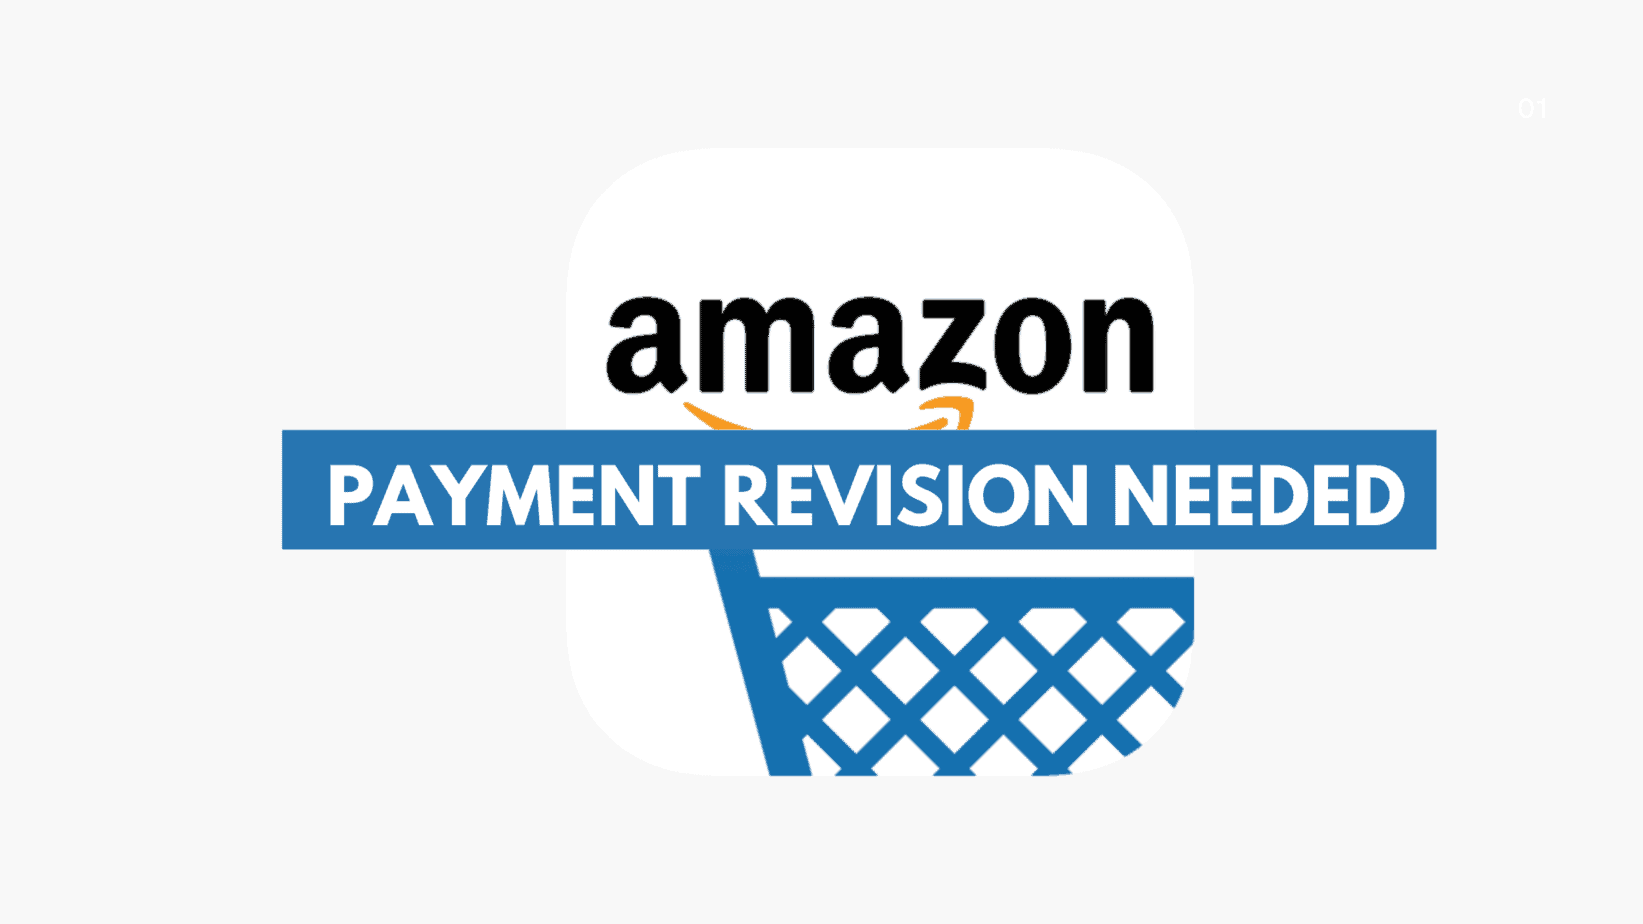 Revise Payment Needed